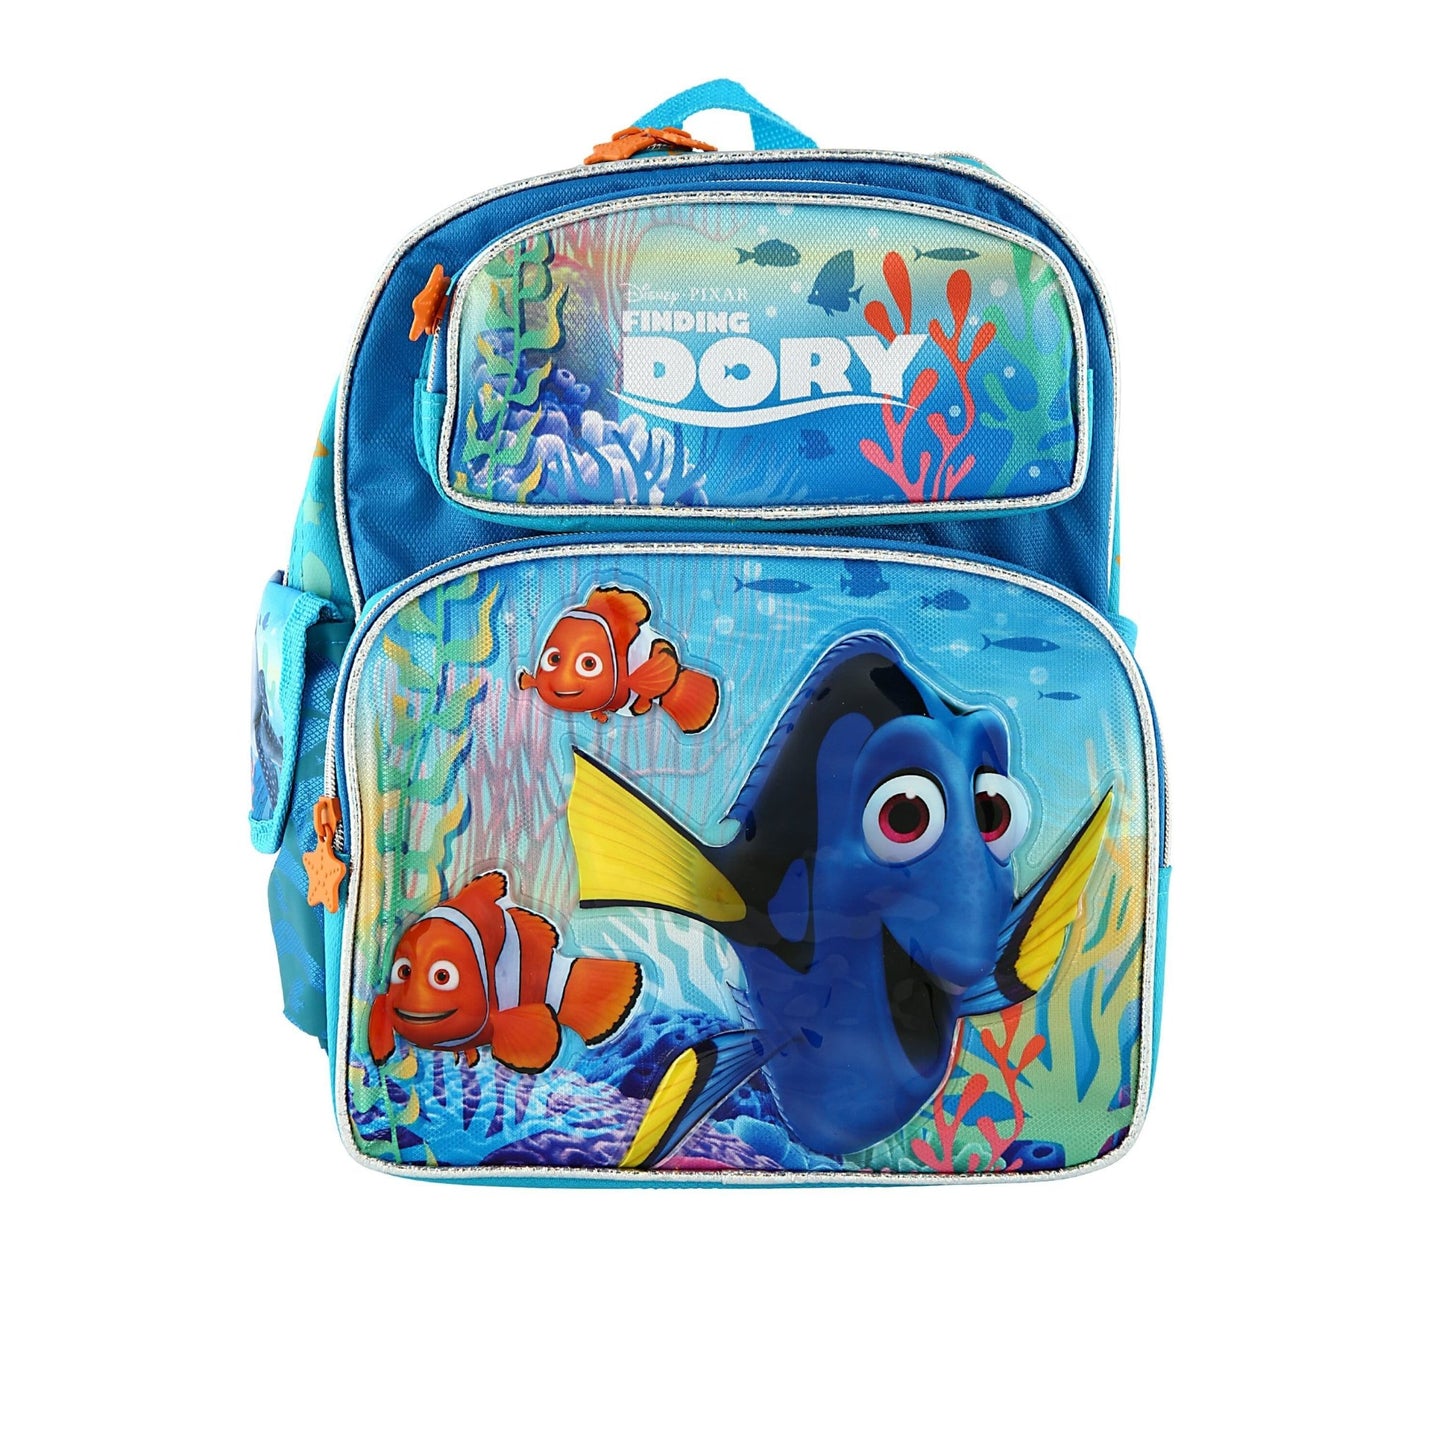 Disney Finding Dory - Backpack - 3 sizes available (10" / 12" / 16") - Simply Life